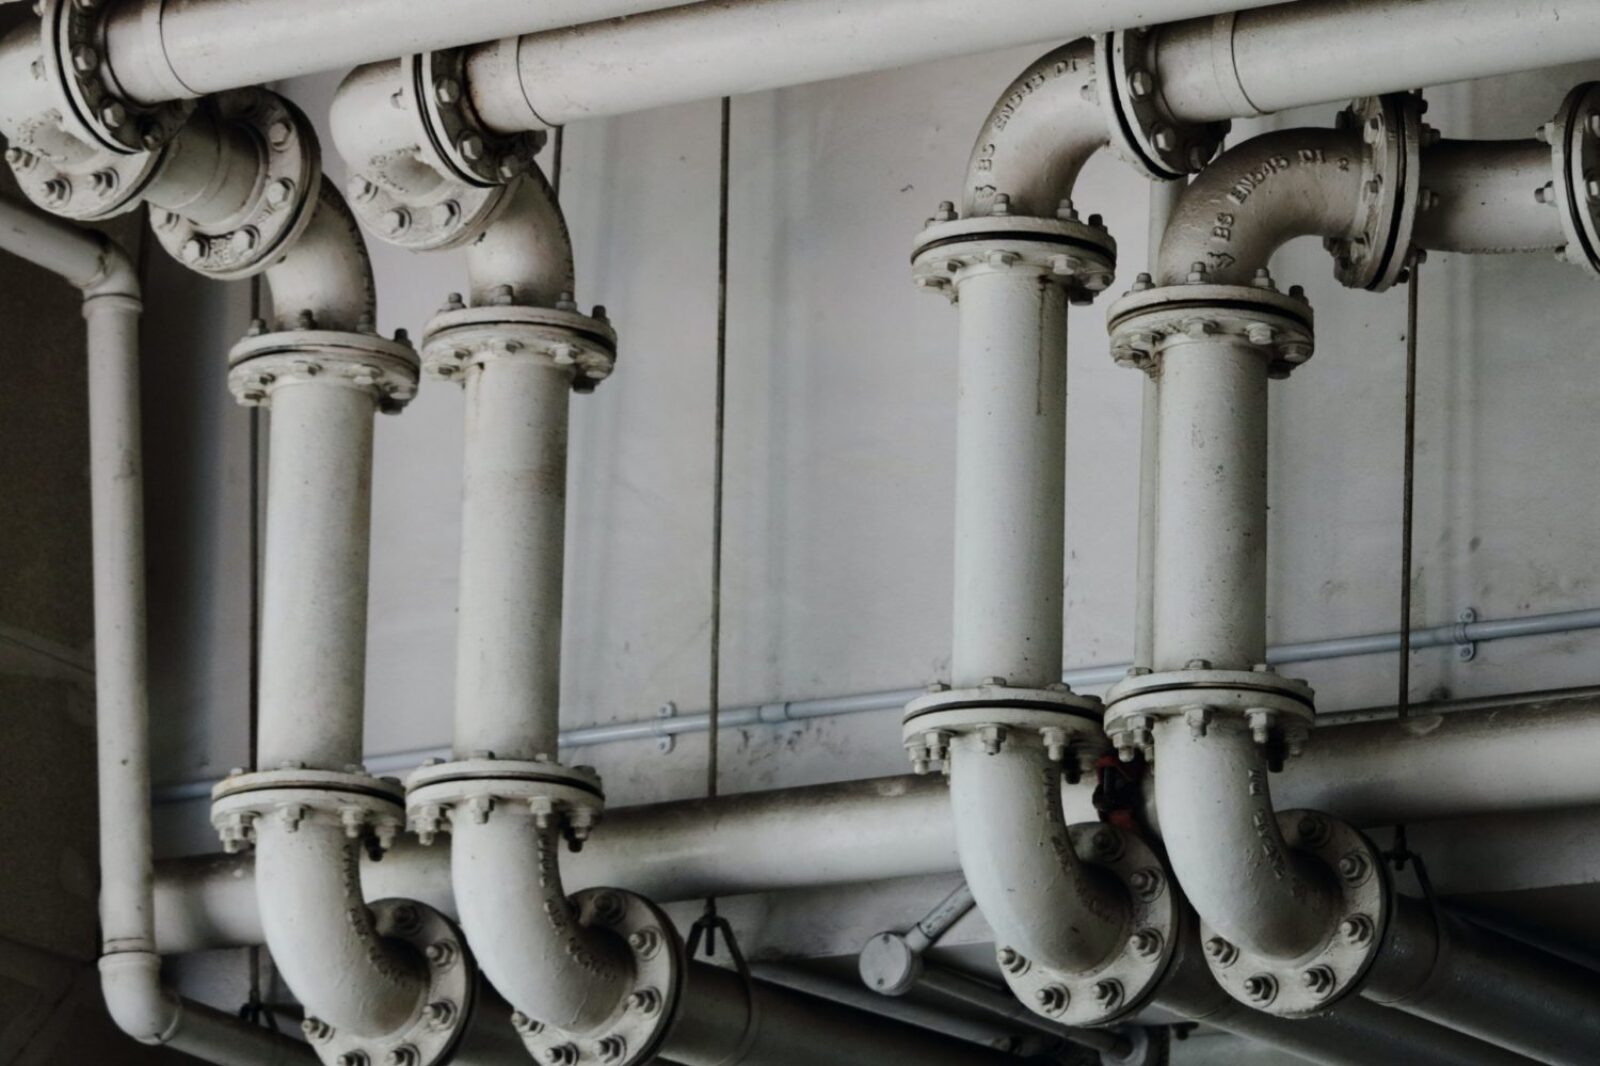 An image which shows a set of pipes